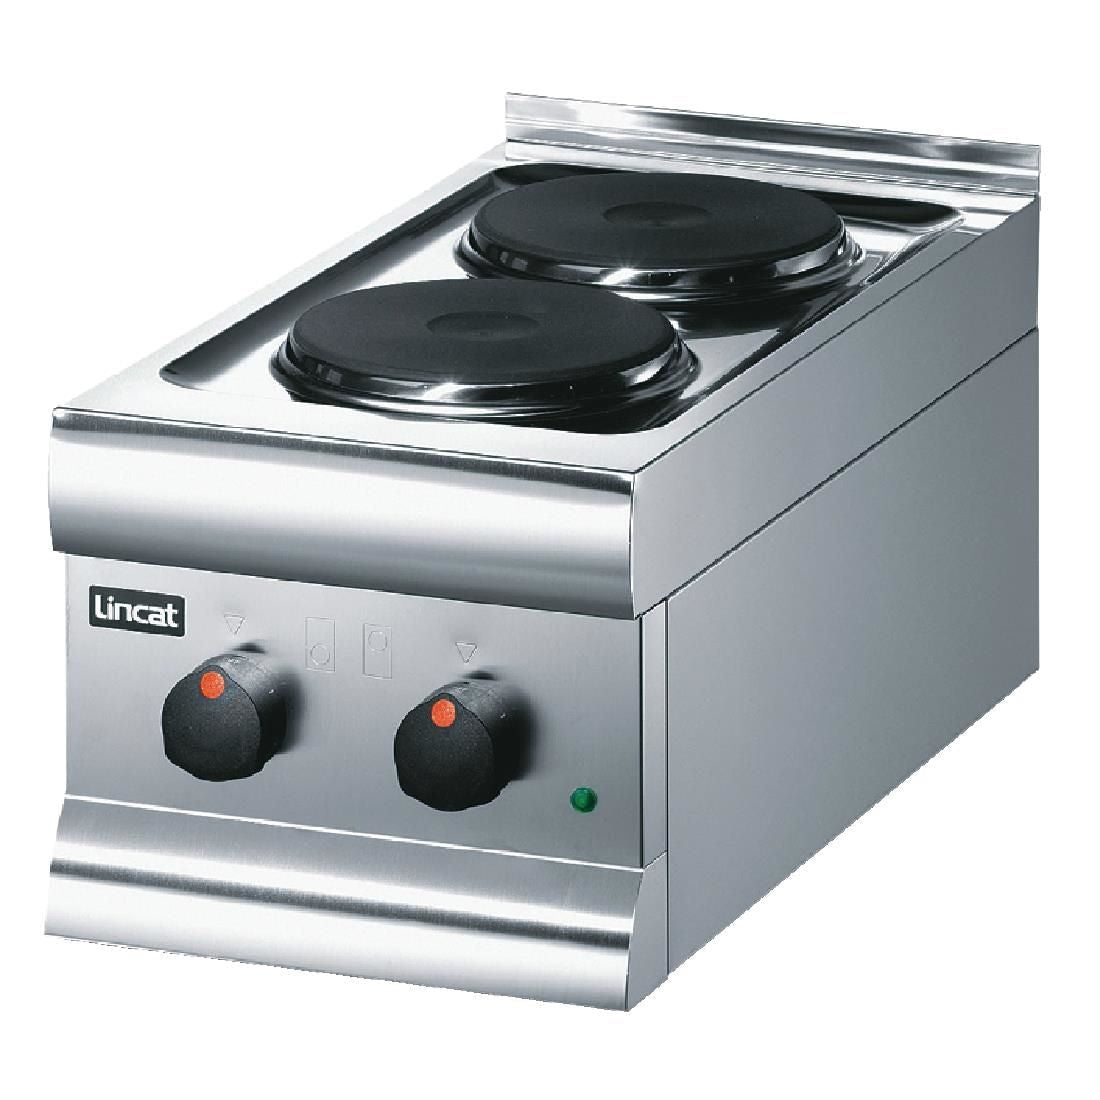 HT3 - Lincat Silverlink 600 Electric Counter-top Boiling Top - 2 Plates - W 300 mm - 3.0 kW JD Catering Equipment Solutions Ltd